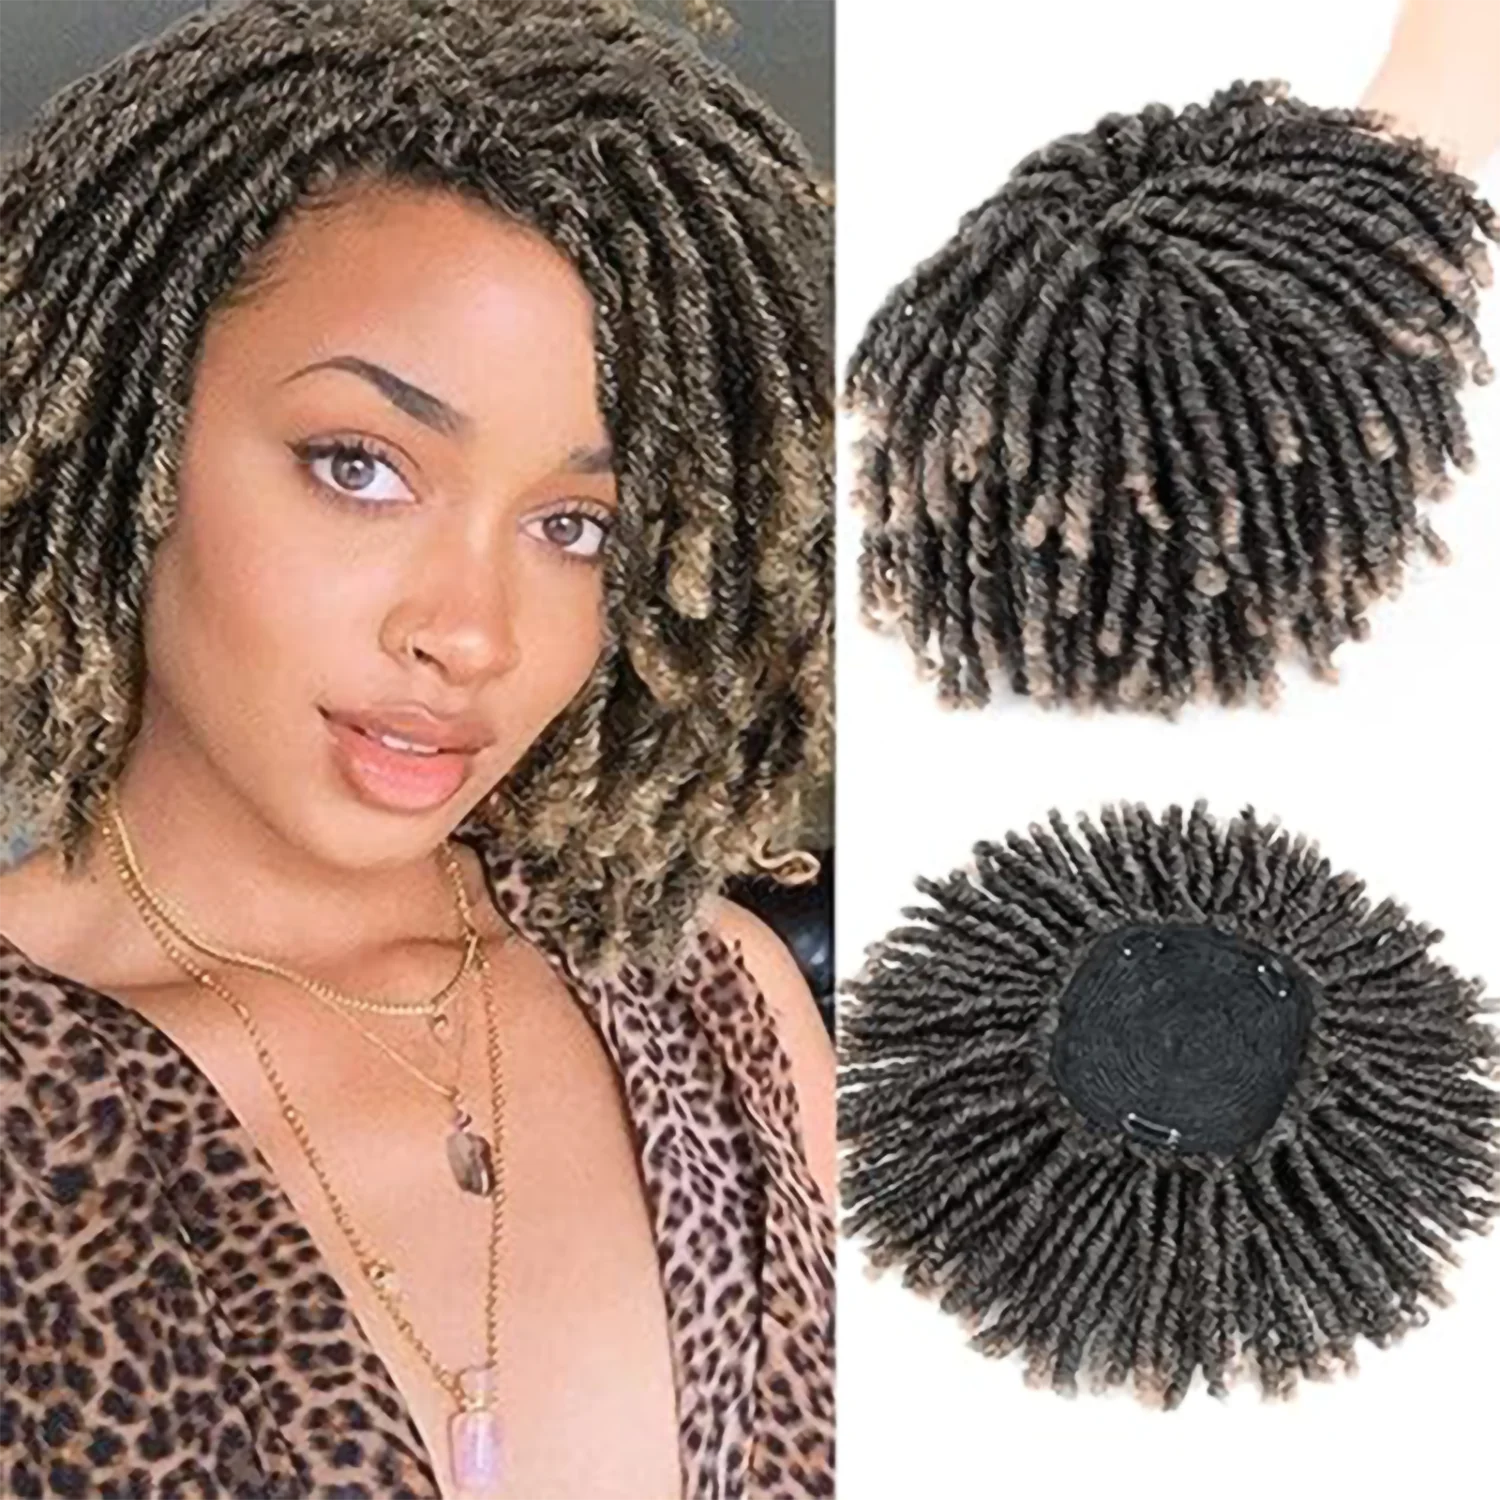 6 Inch Dreadlock Hair Topper Synthetic Locs Braided Half Wig Short Dreadlocs Hair Toupee Afro Curly Wigs For Black Women and Men